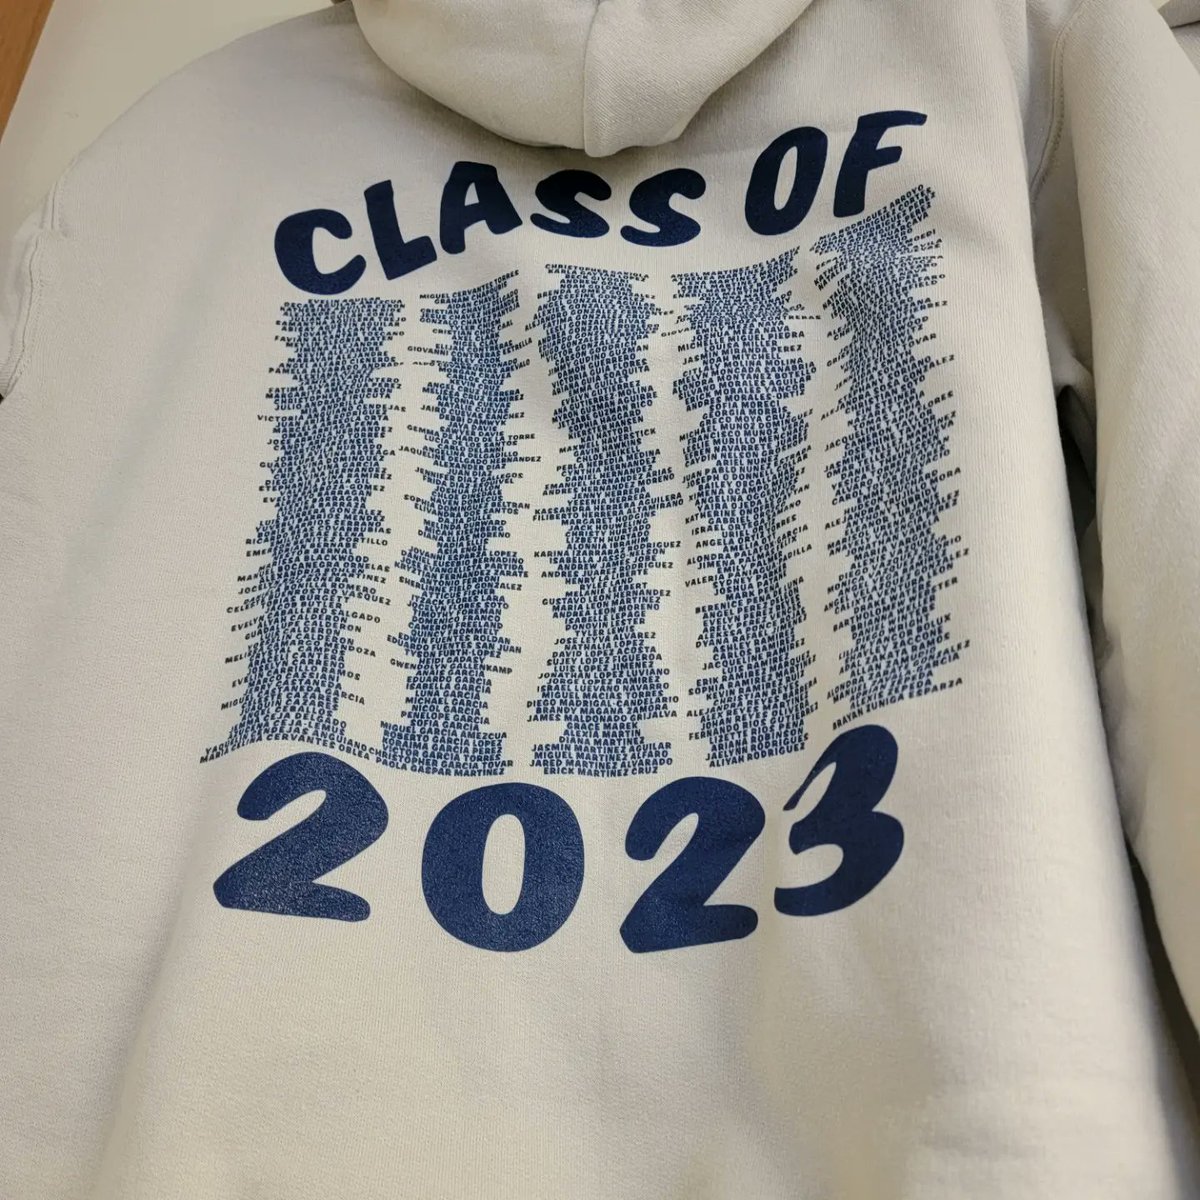 SENIORS, More hoodies have arrived. All sizes!! We also have apple pay, credit cards, all the payment methods!! We will be ready to sell by break!